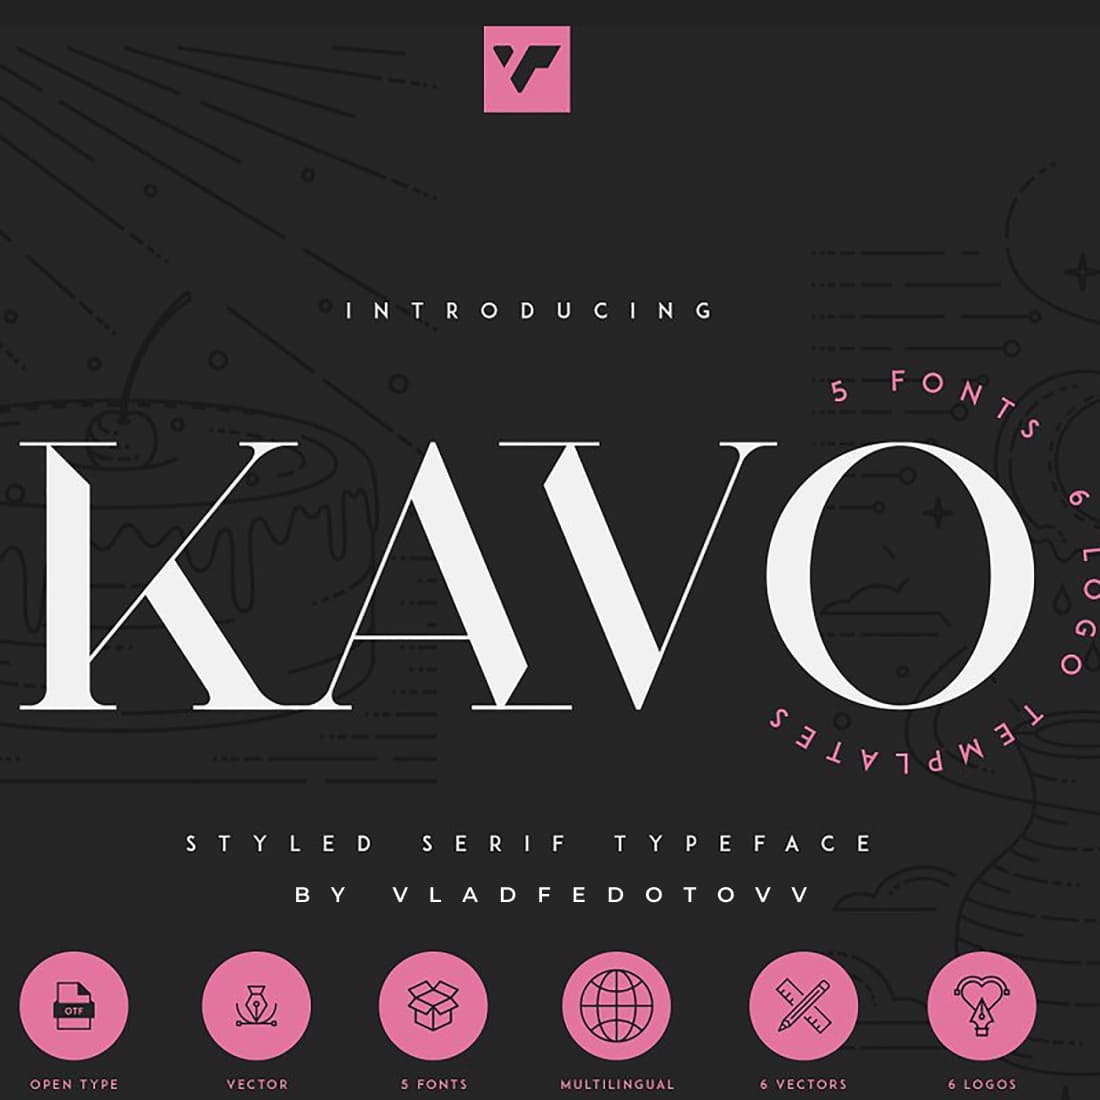 Kavo Styled Serif Typeface Family 5 fonts cover images.